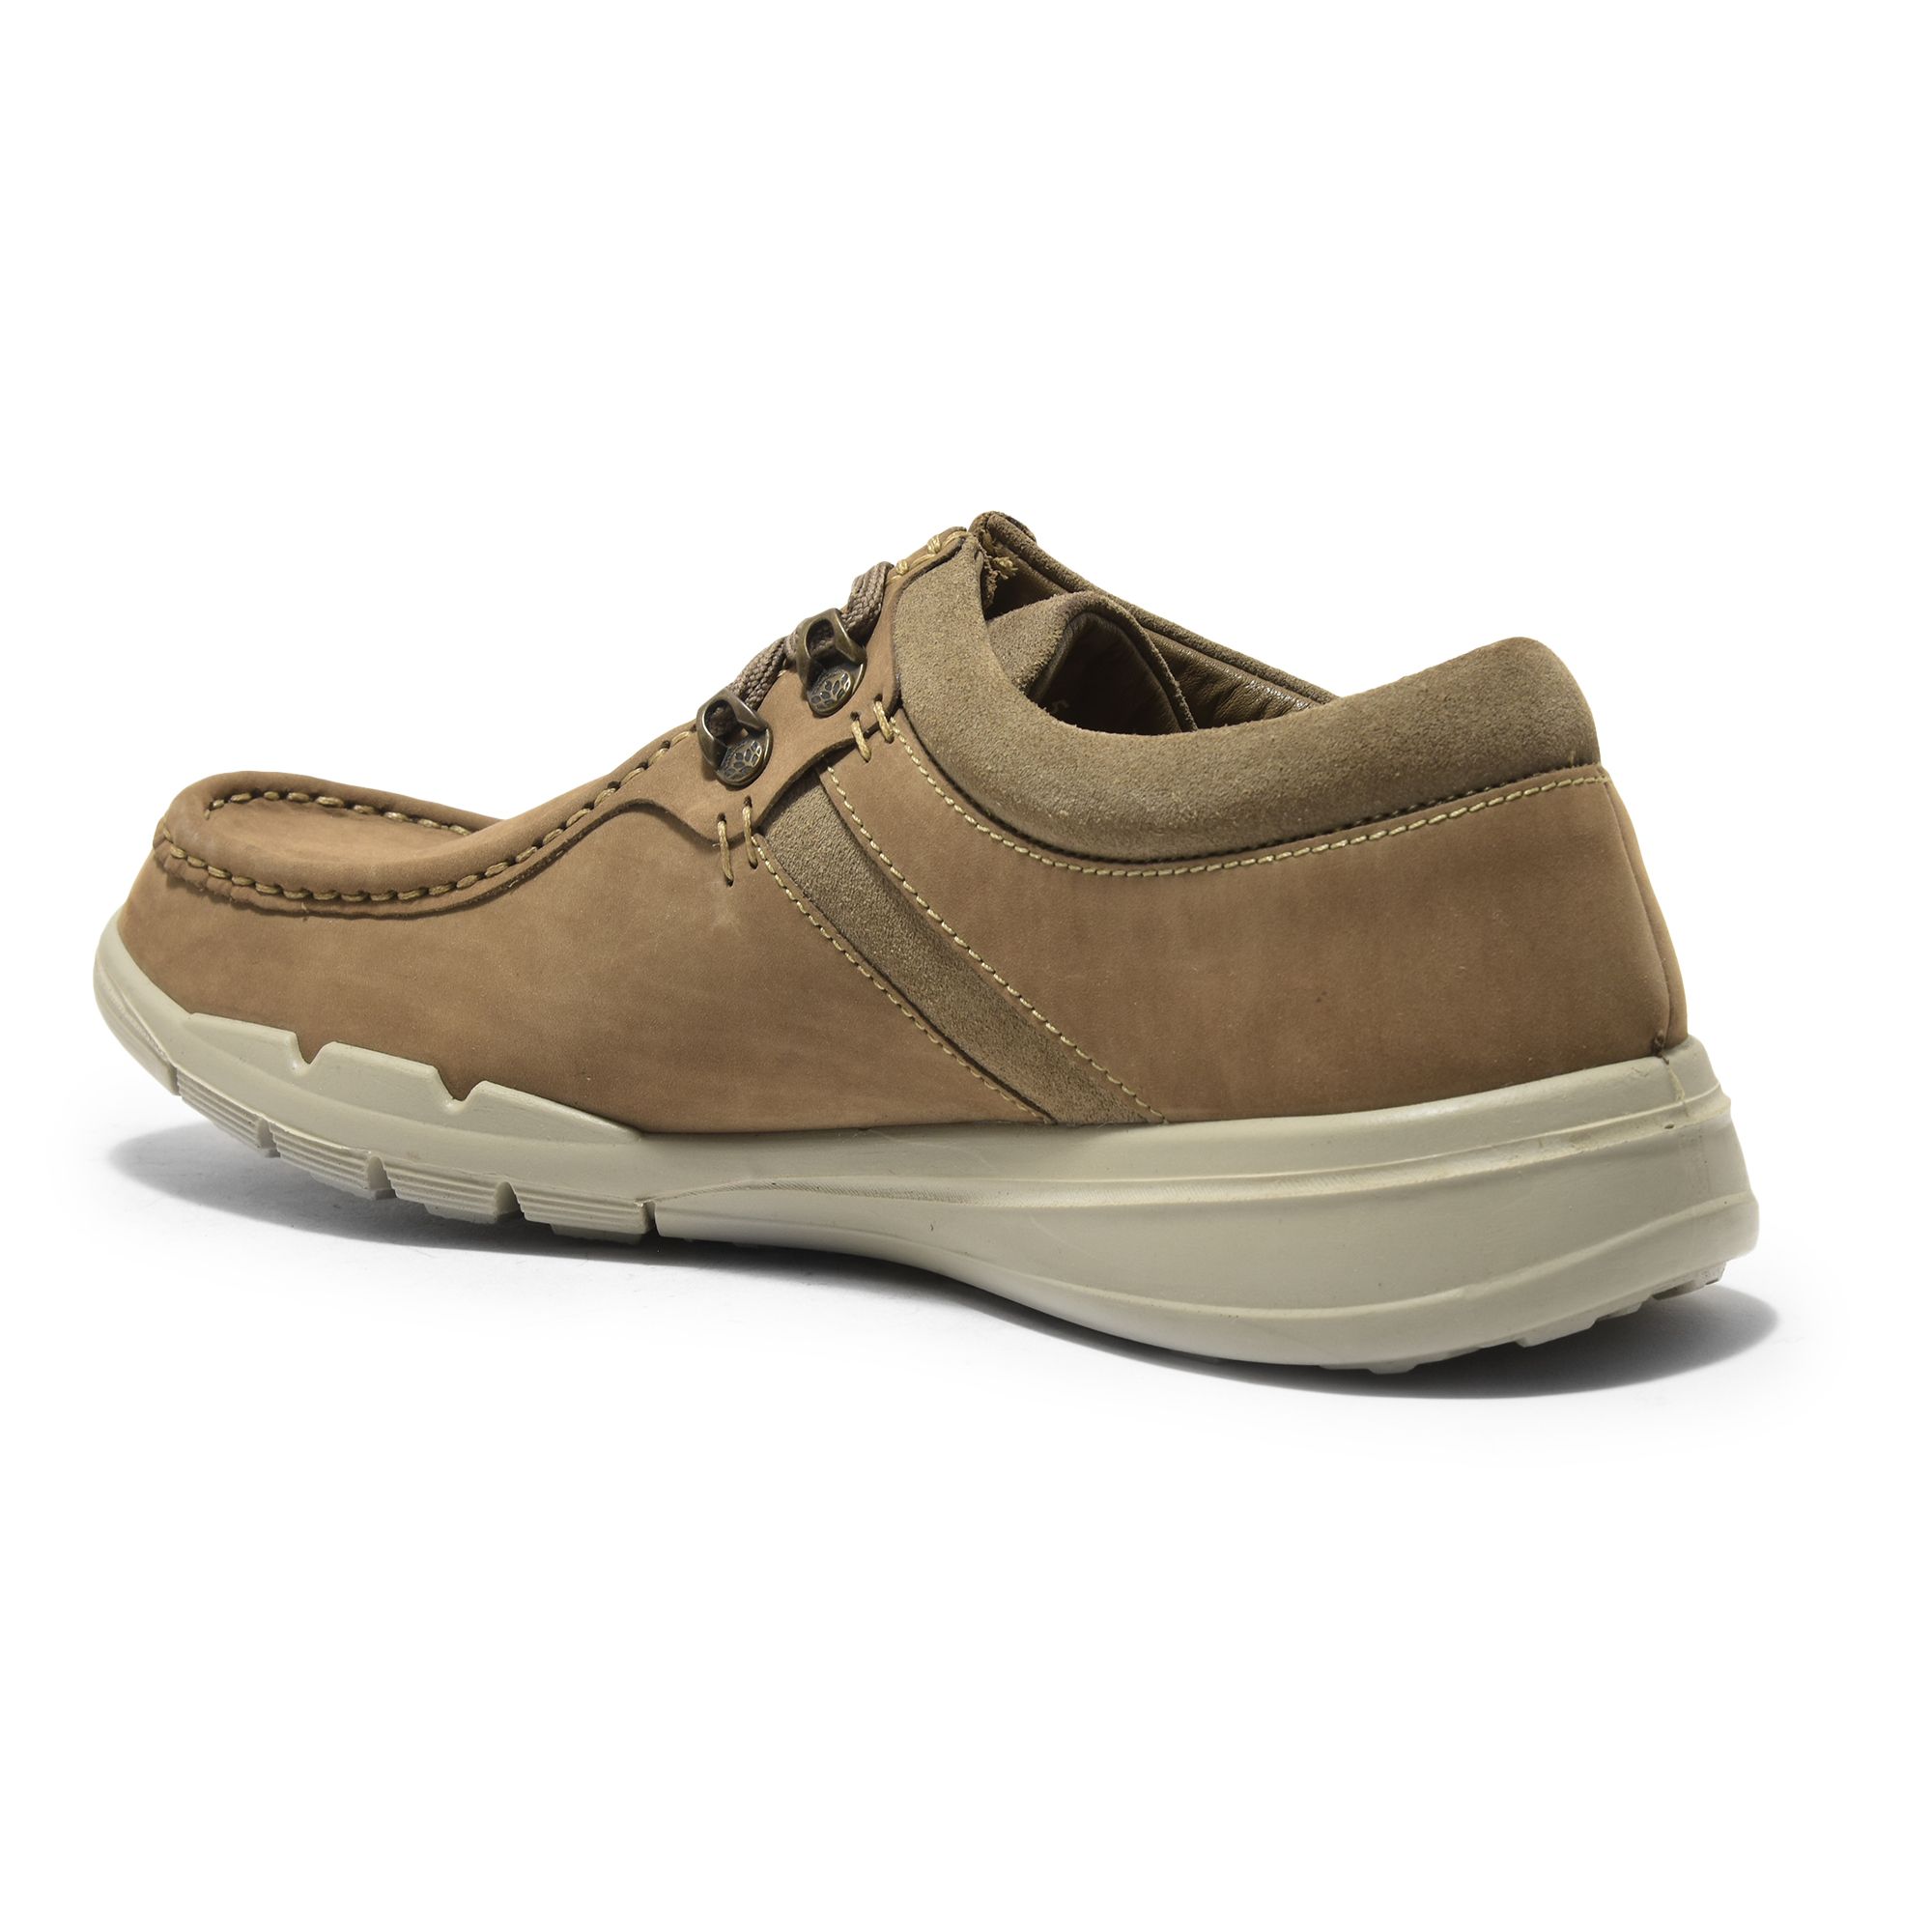 Woodland Shoes - Buy Genuine Woodland Shoes Online at Best Price | Myntra